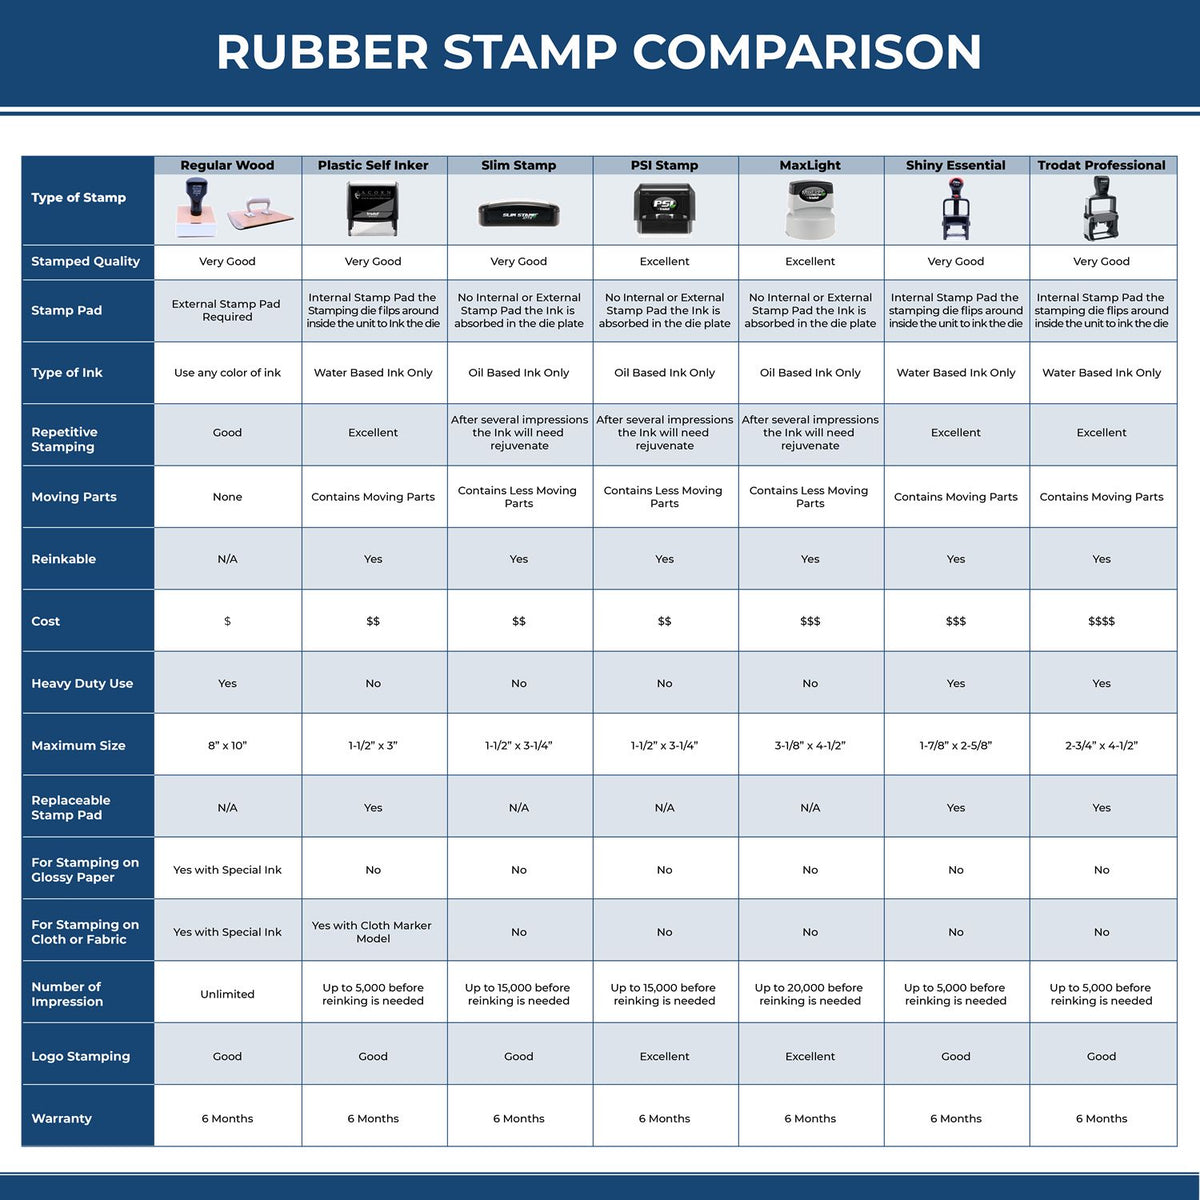 A comparison chart for the different types of mount models available for the PSI New Hampshire Notary Stamp.